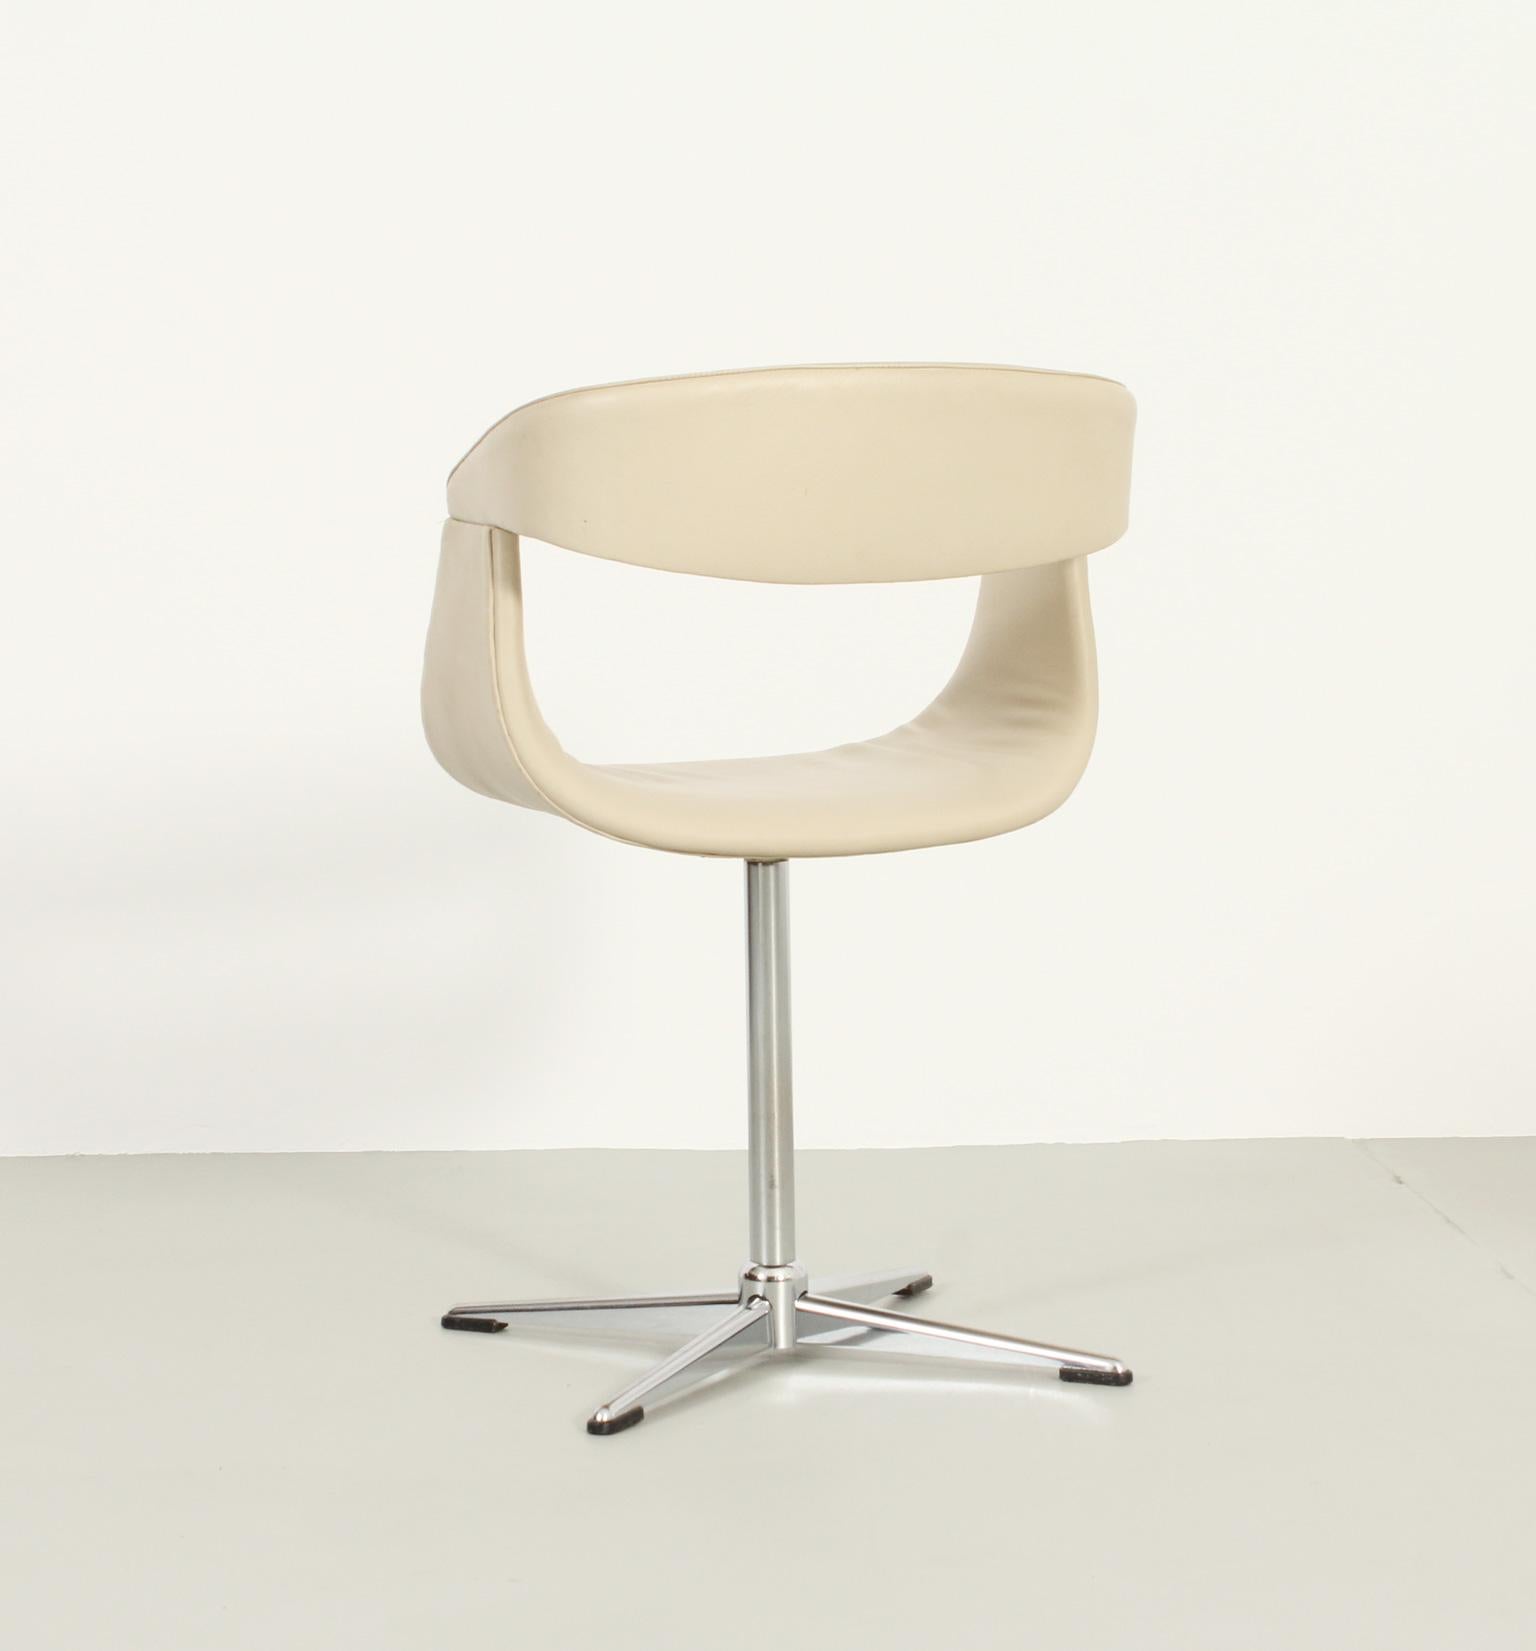 Office Swivel Chair in Cream Leather, France, 1960's For Sale 4